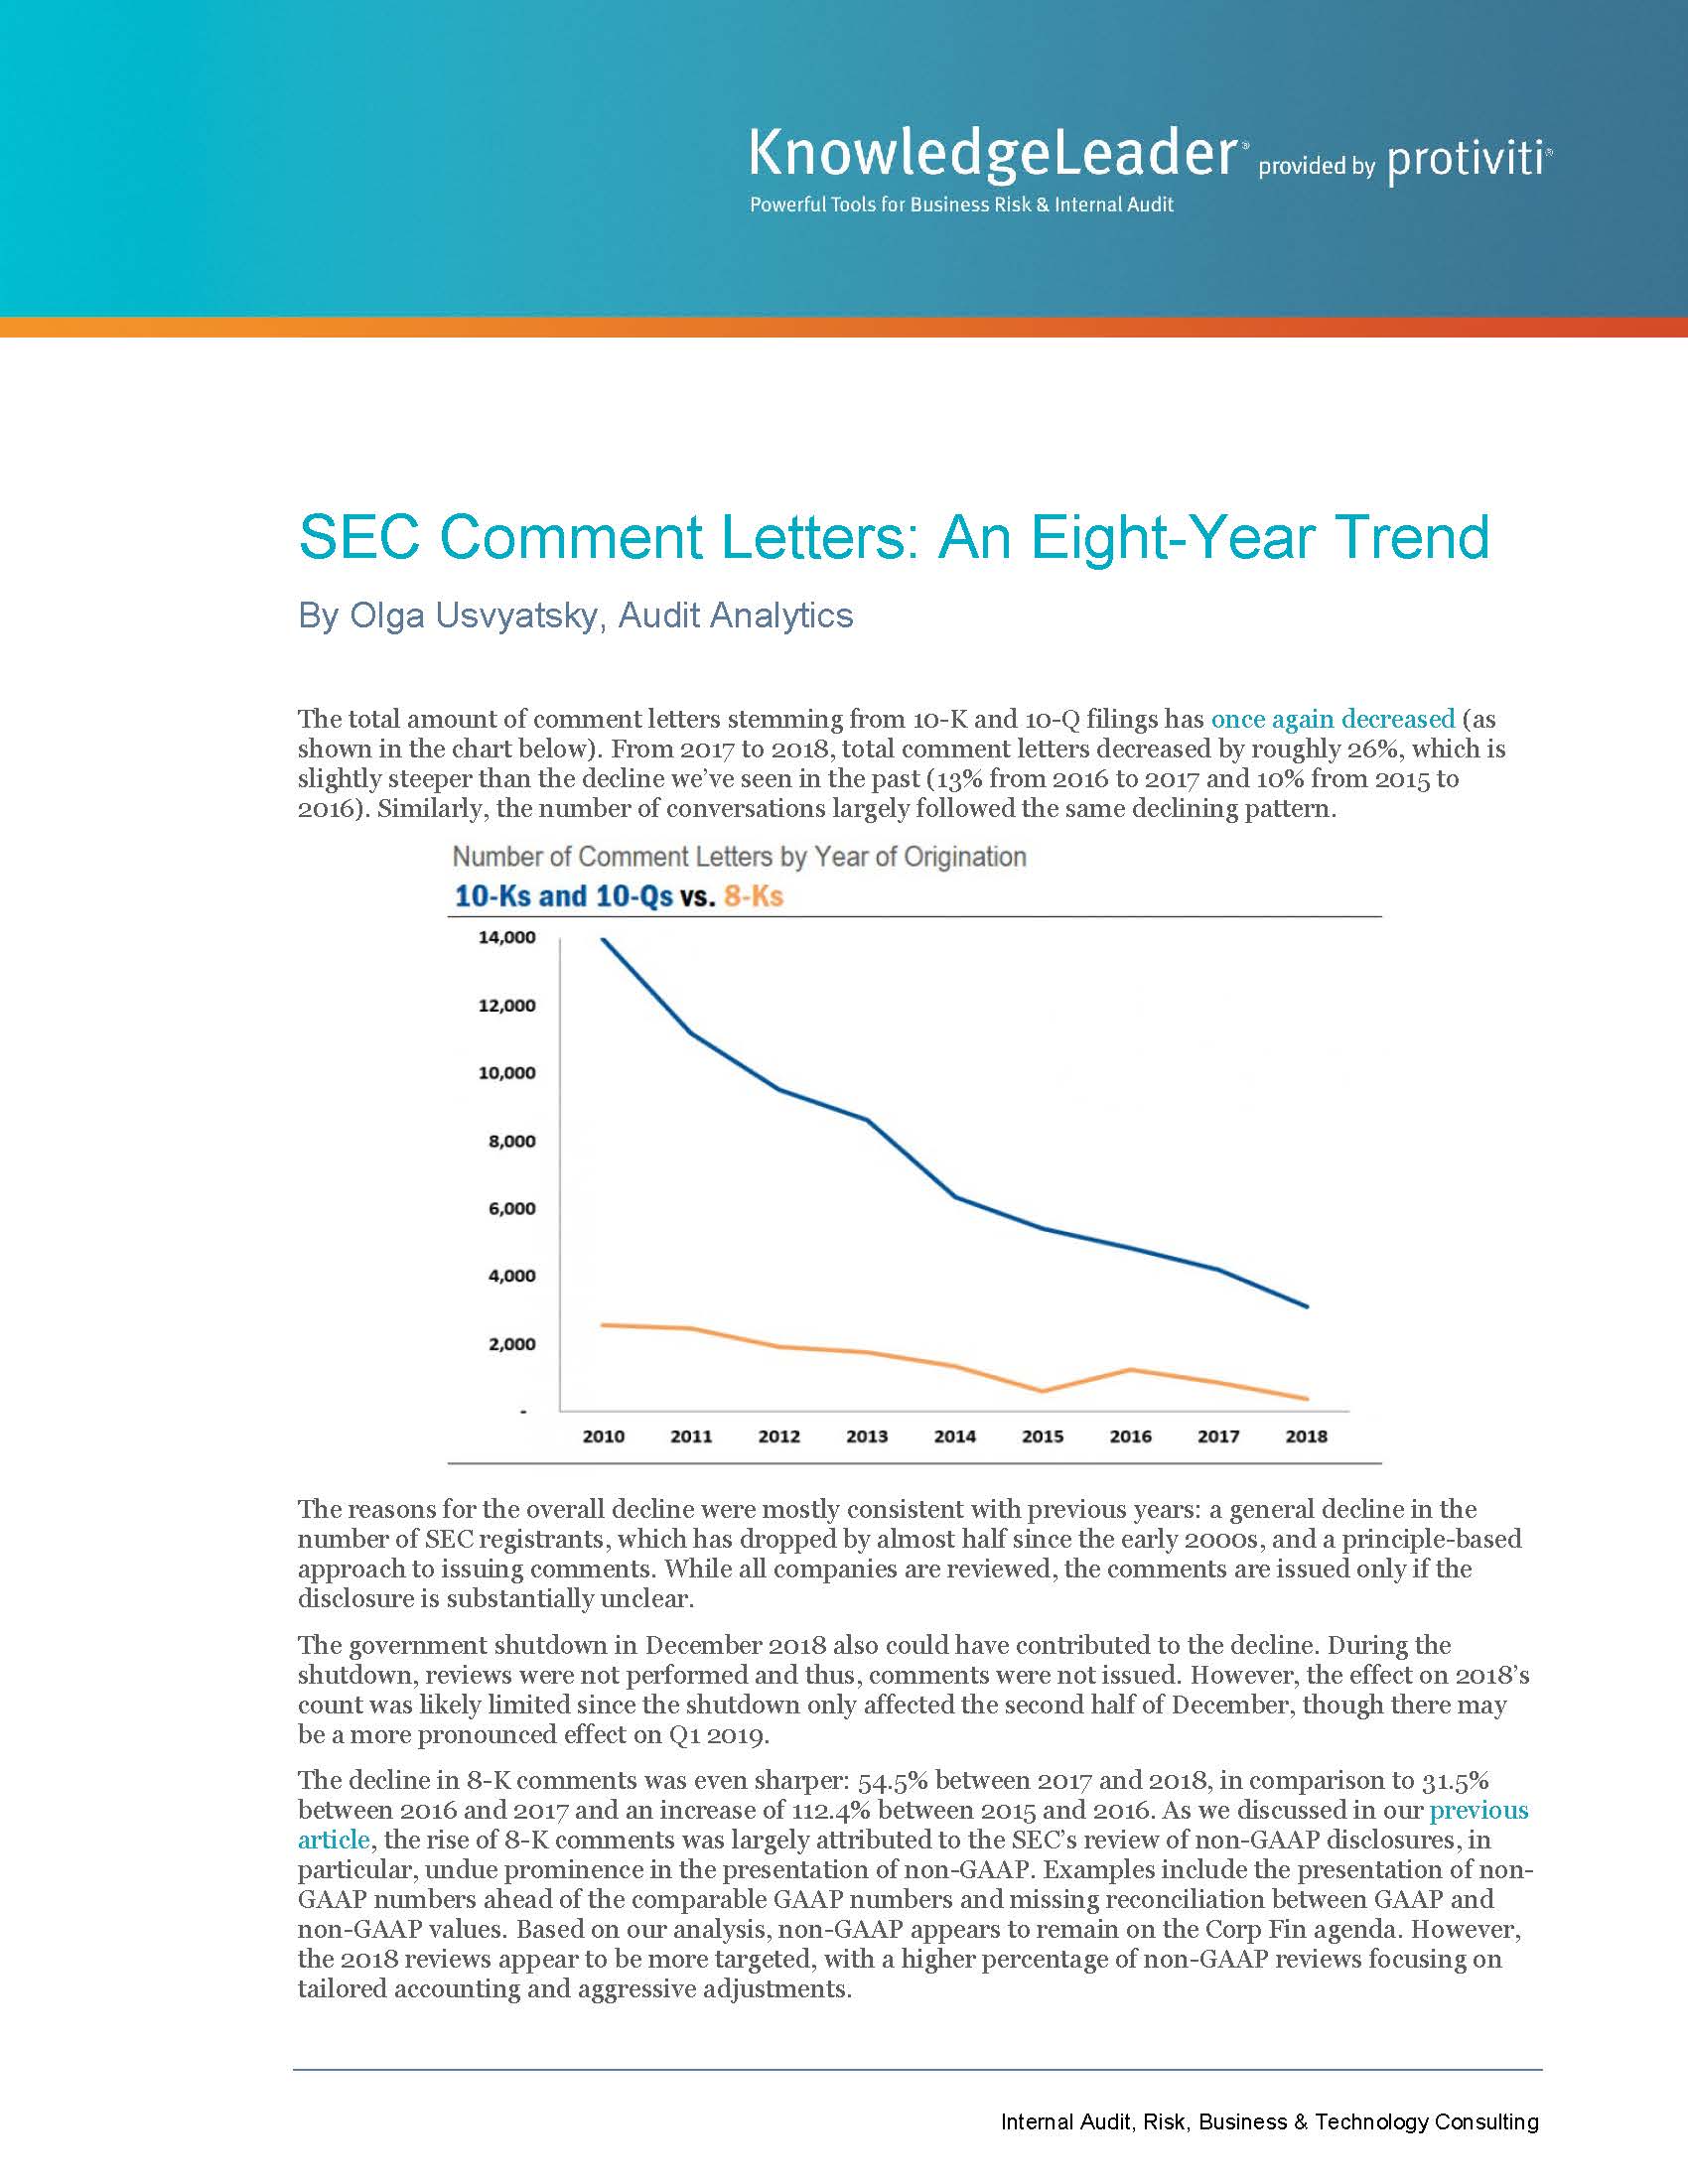 Screenshot of the first page of SEC Comment Letters An Eight-Year Trend